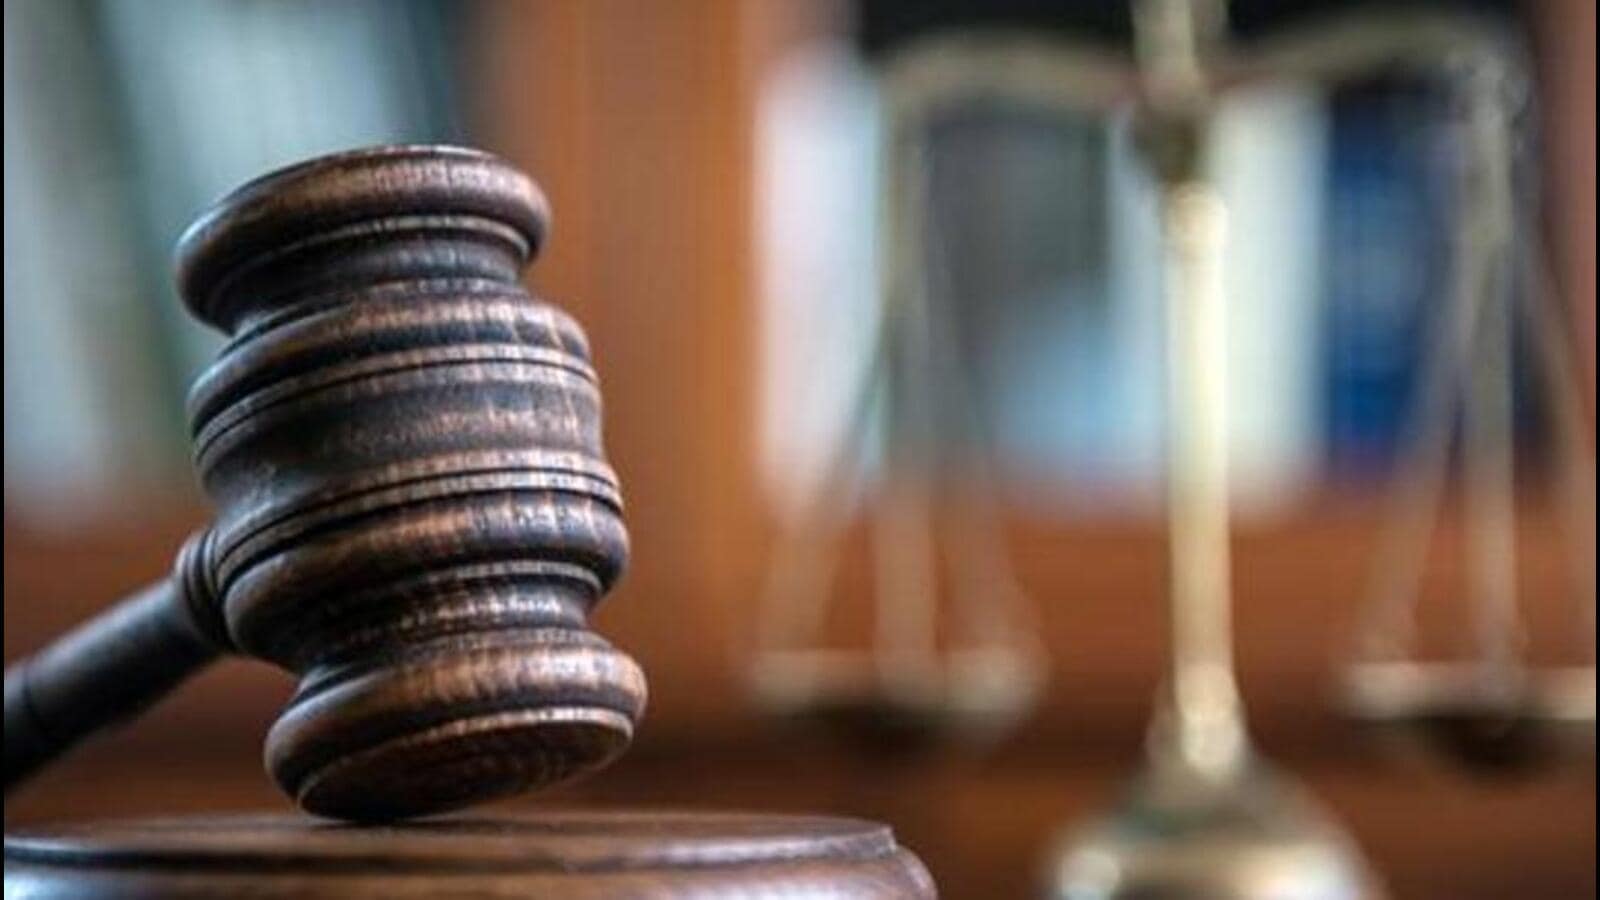 Assam court gives death sentence to 3 for rape and murder of two minor girls